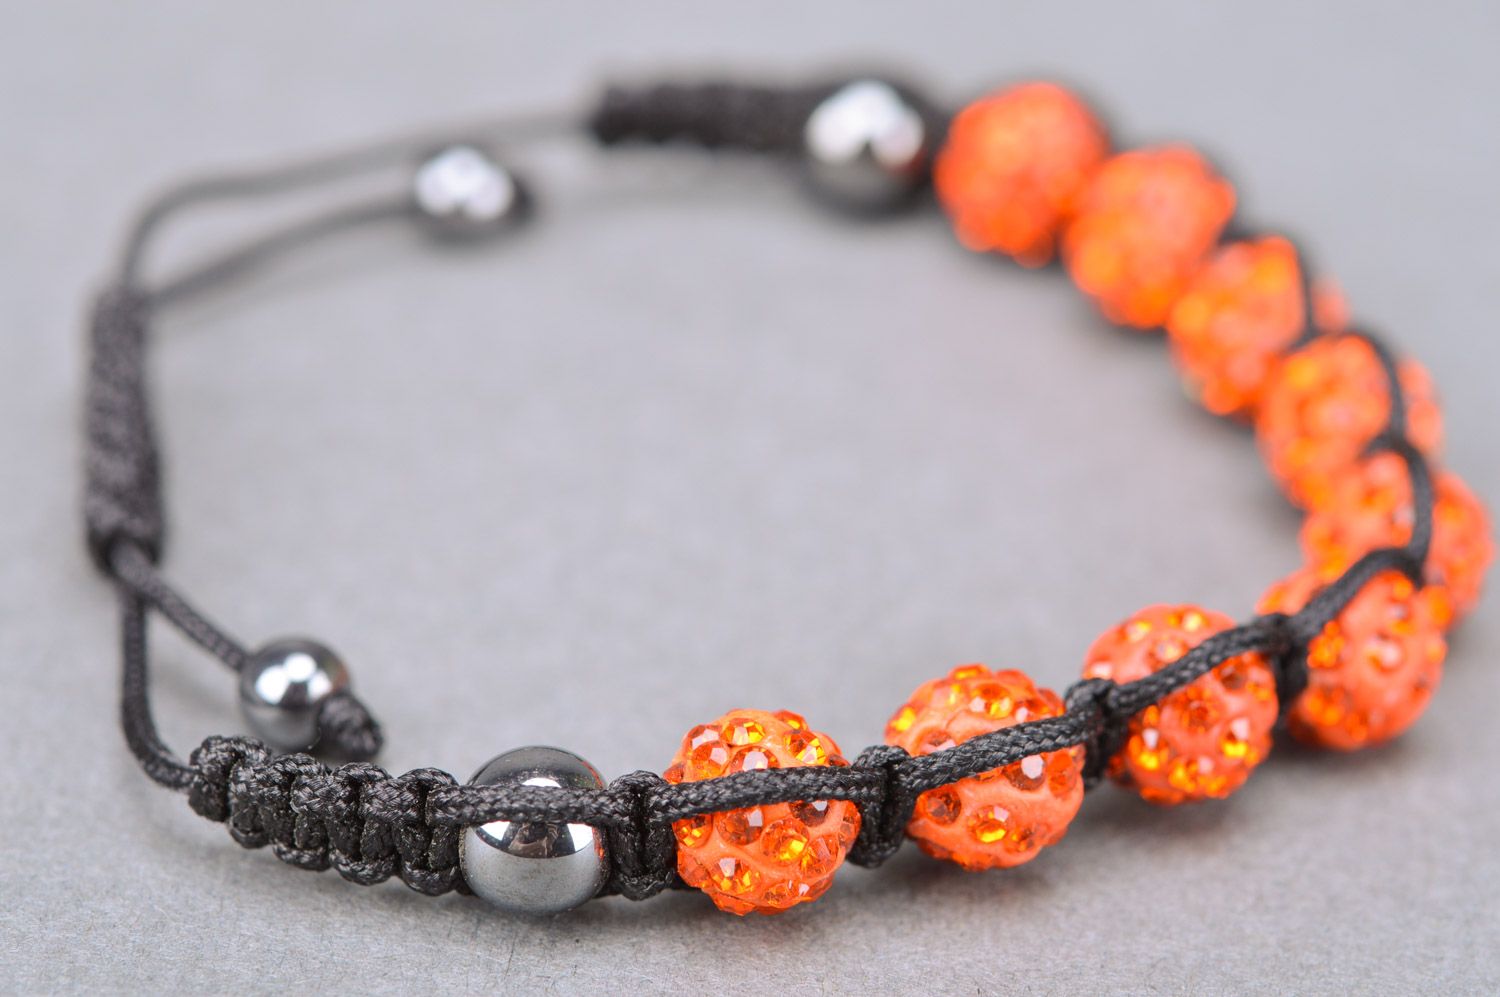 Bright orange handmade wrist bracelet woven of threads and beads with adjustable size photo 5